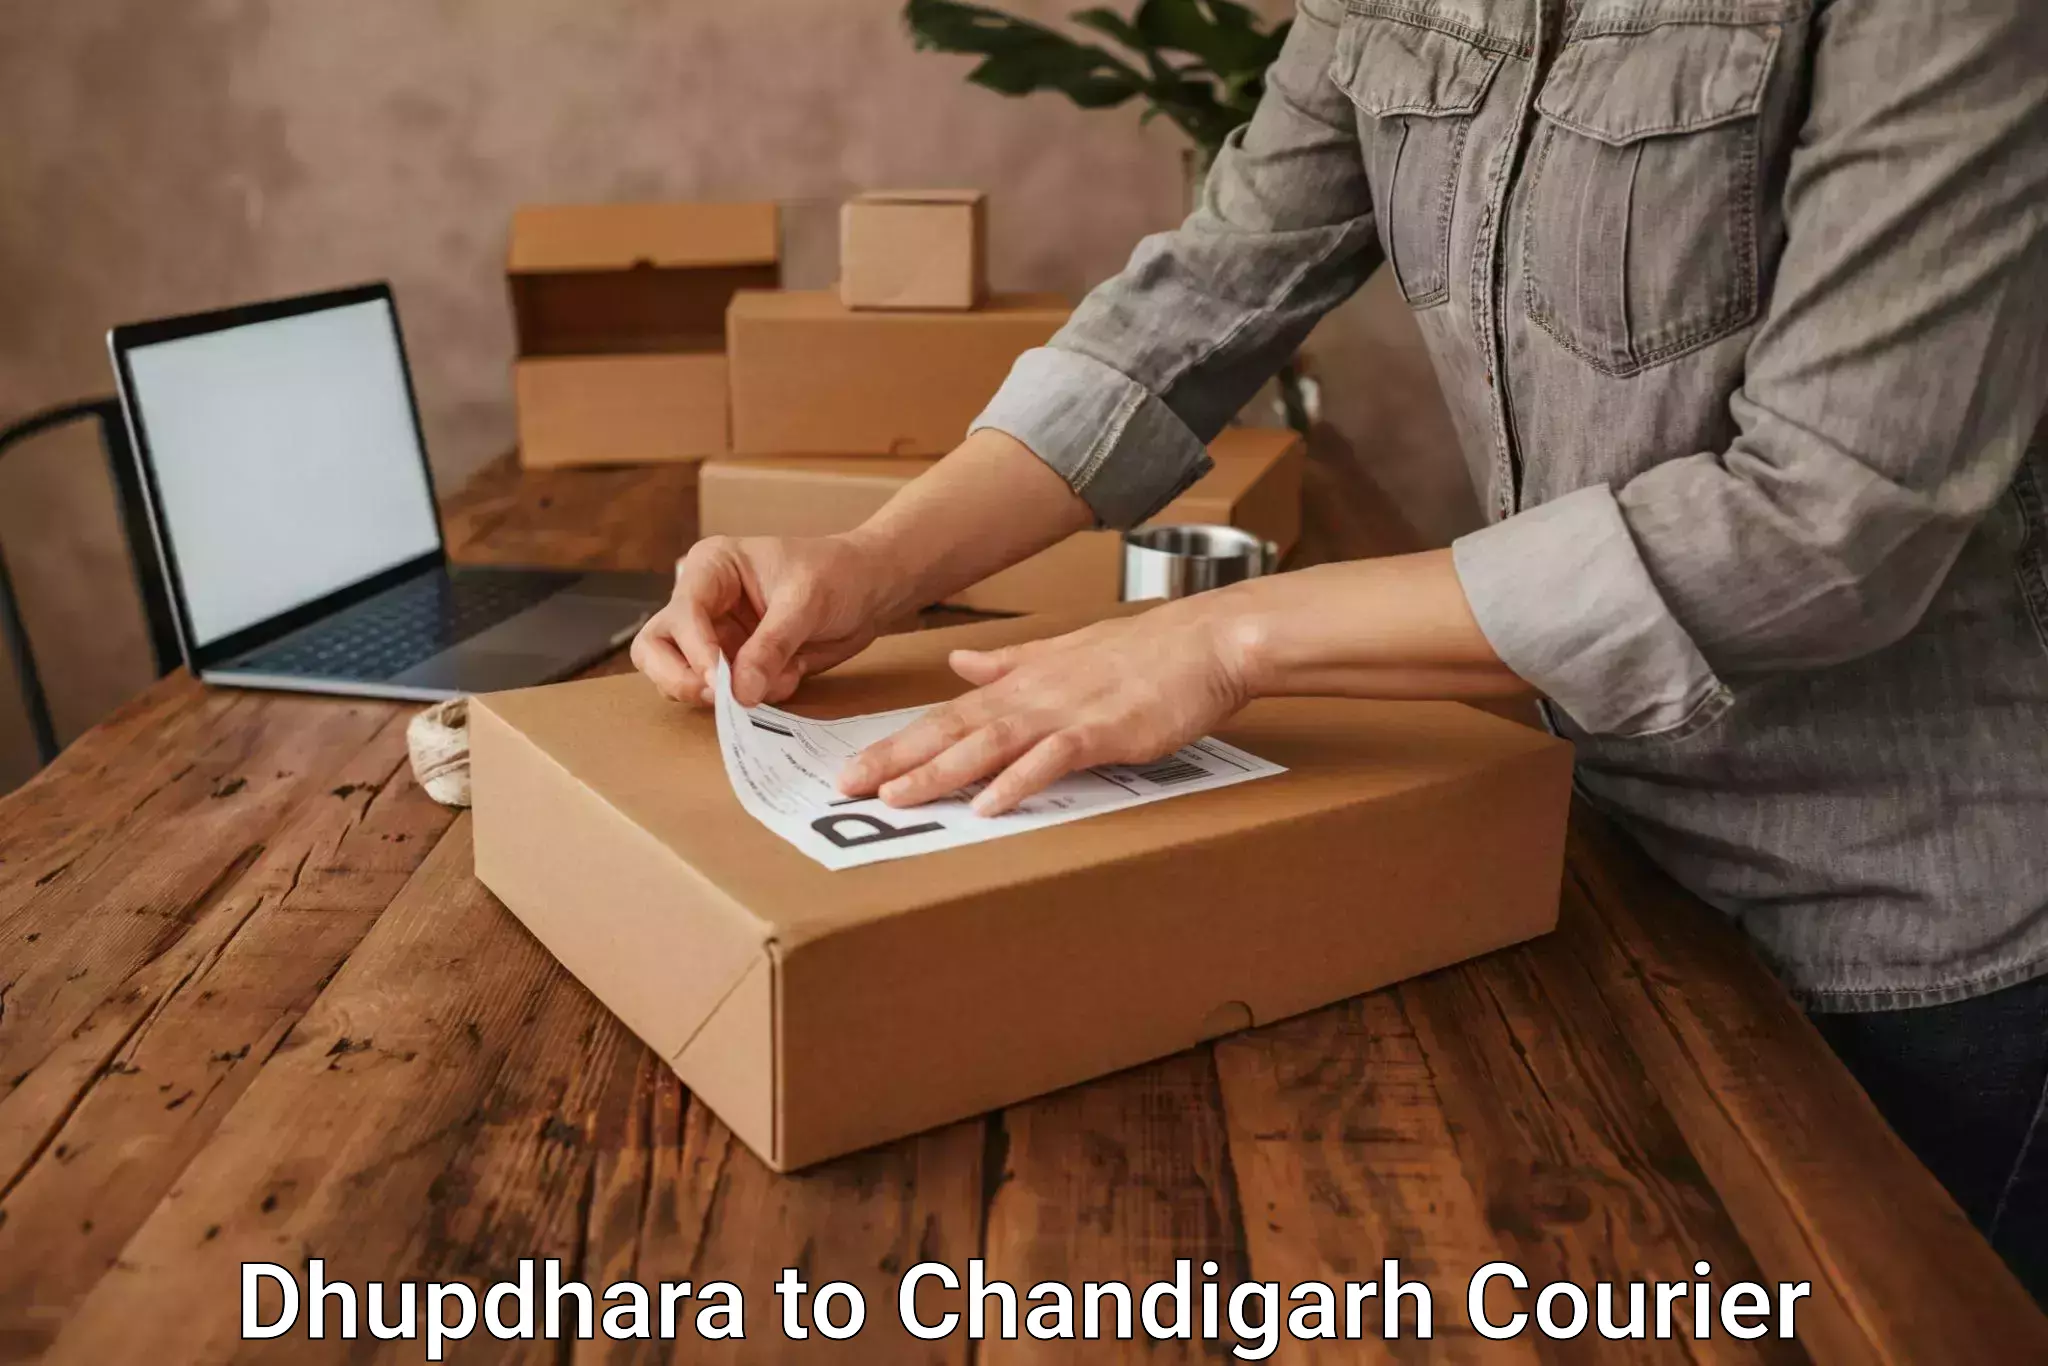 Overnight delivery services Dhupdhara to Chandigarh